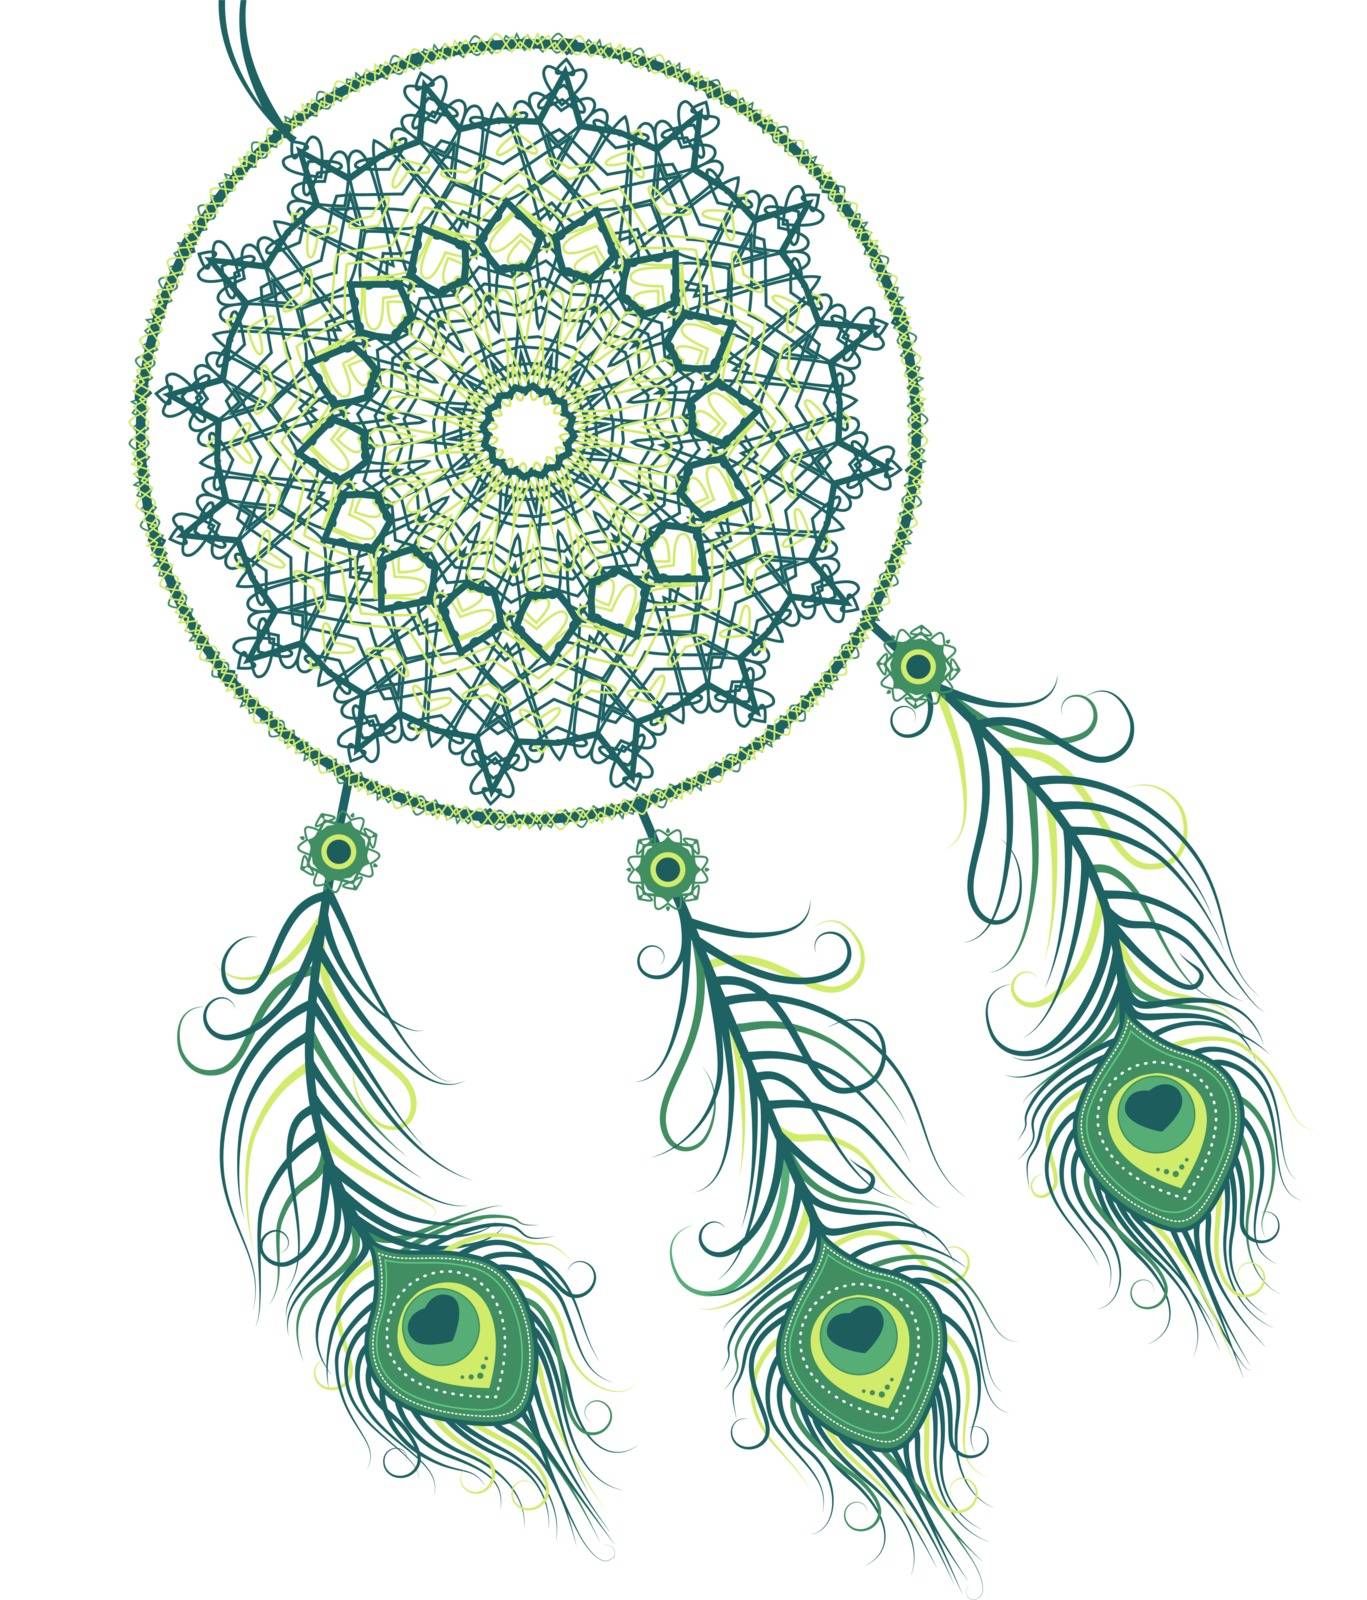 Vector illustration of a dreamcatcher with a peacock feathers on a white background